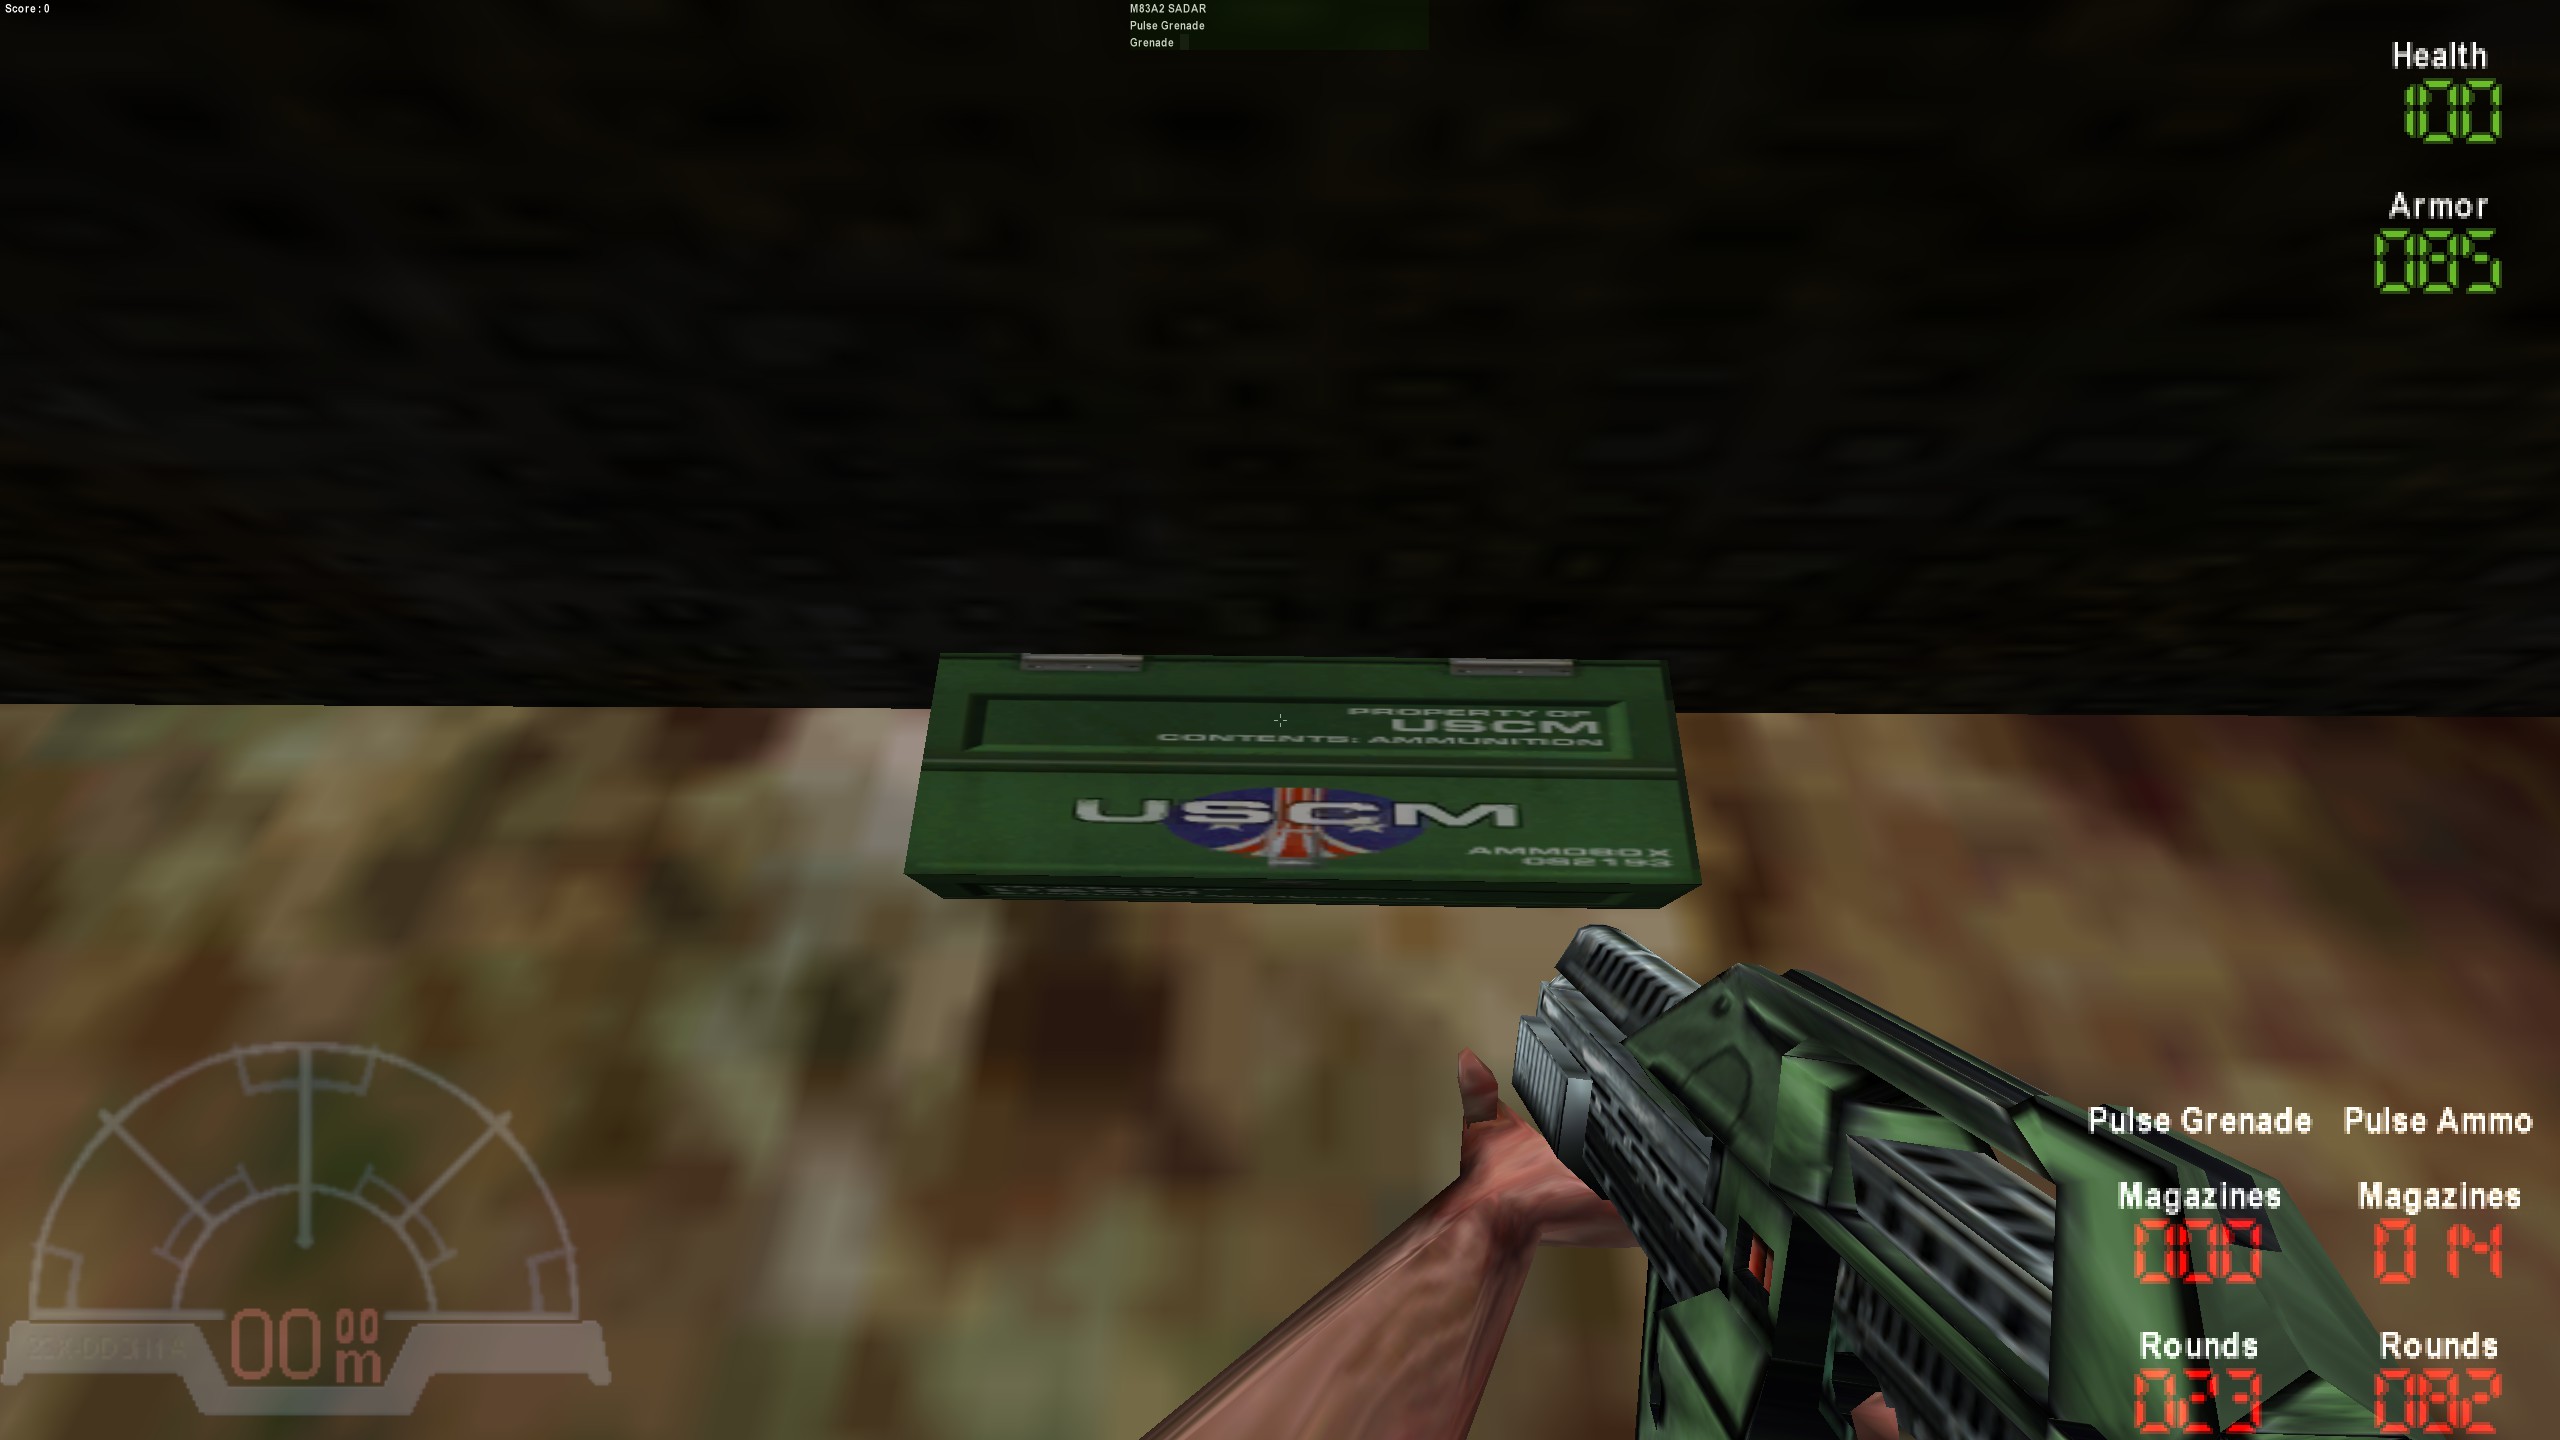 An image showing the USCM ammo box as well as the pickups obtained at the top of the screen